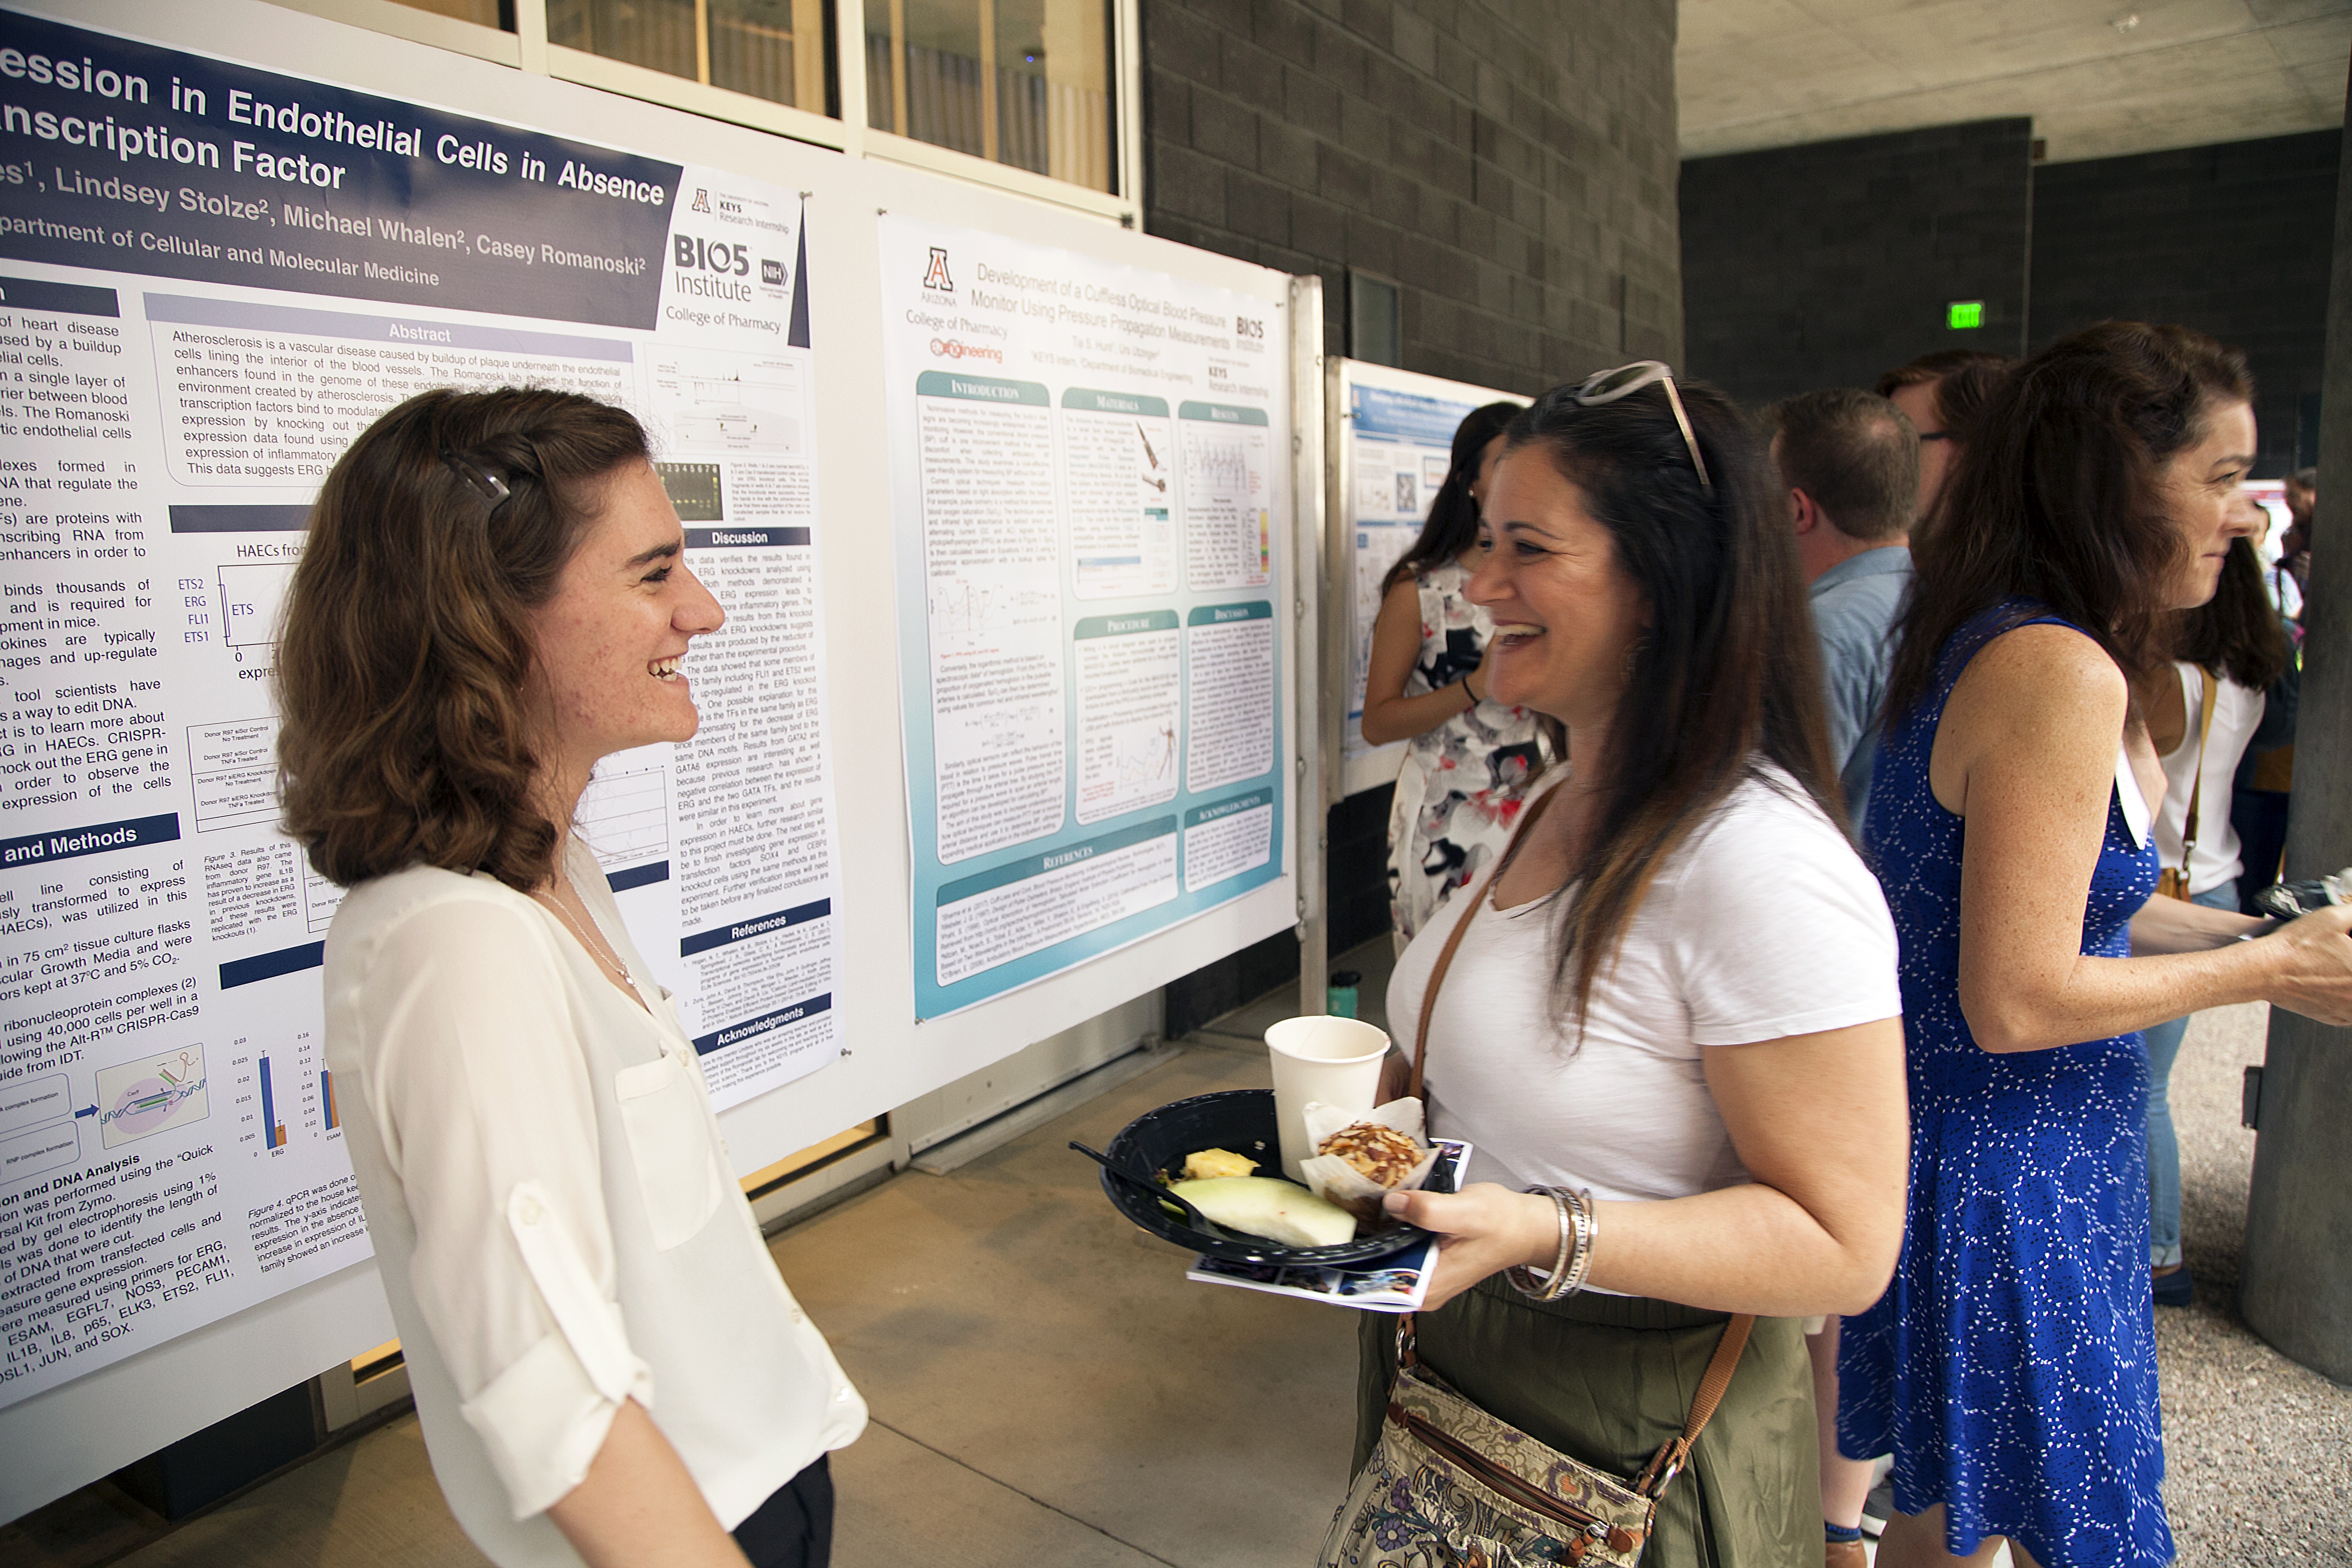 Two young people talk and laugh in front of a scientific poster